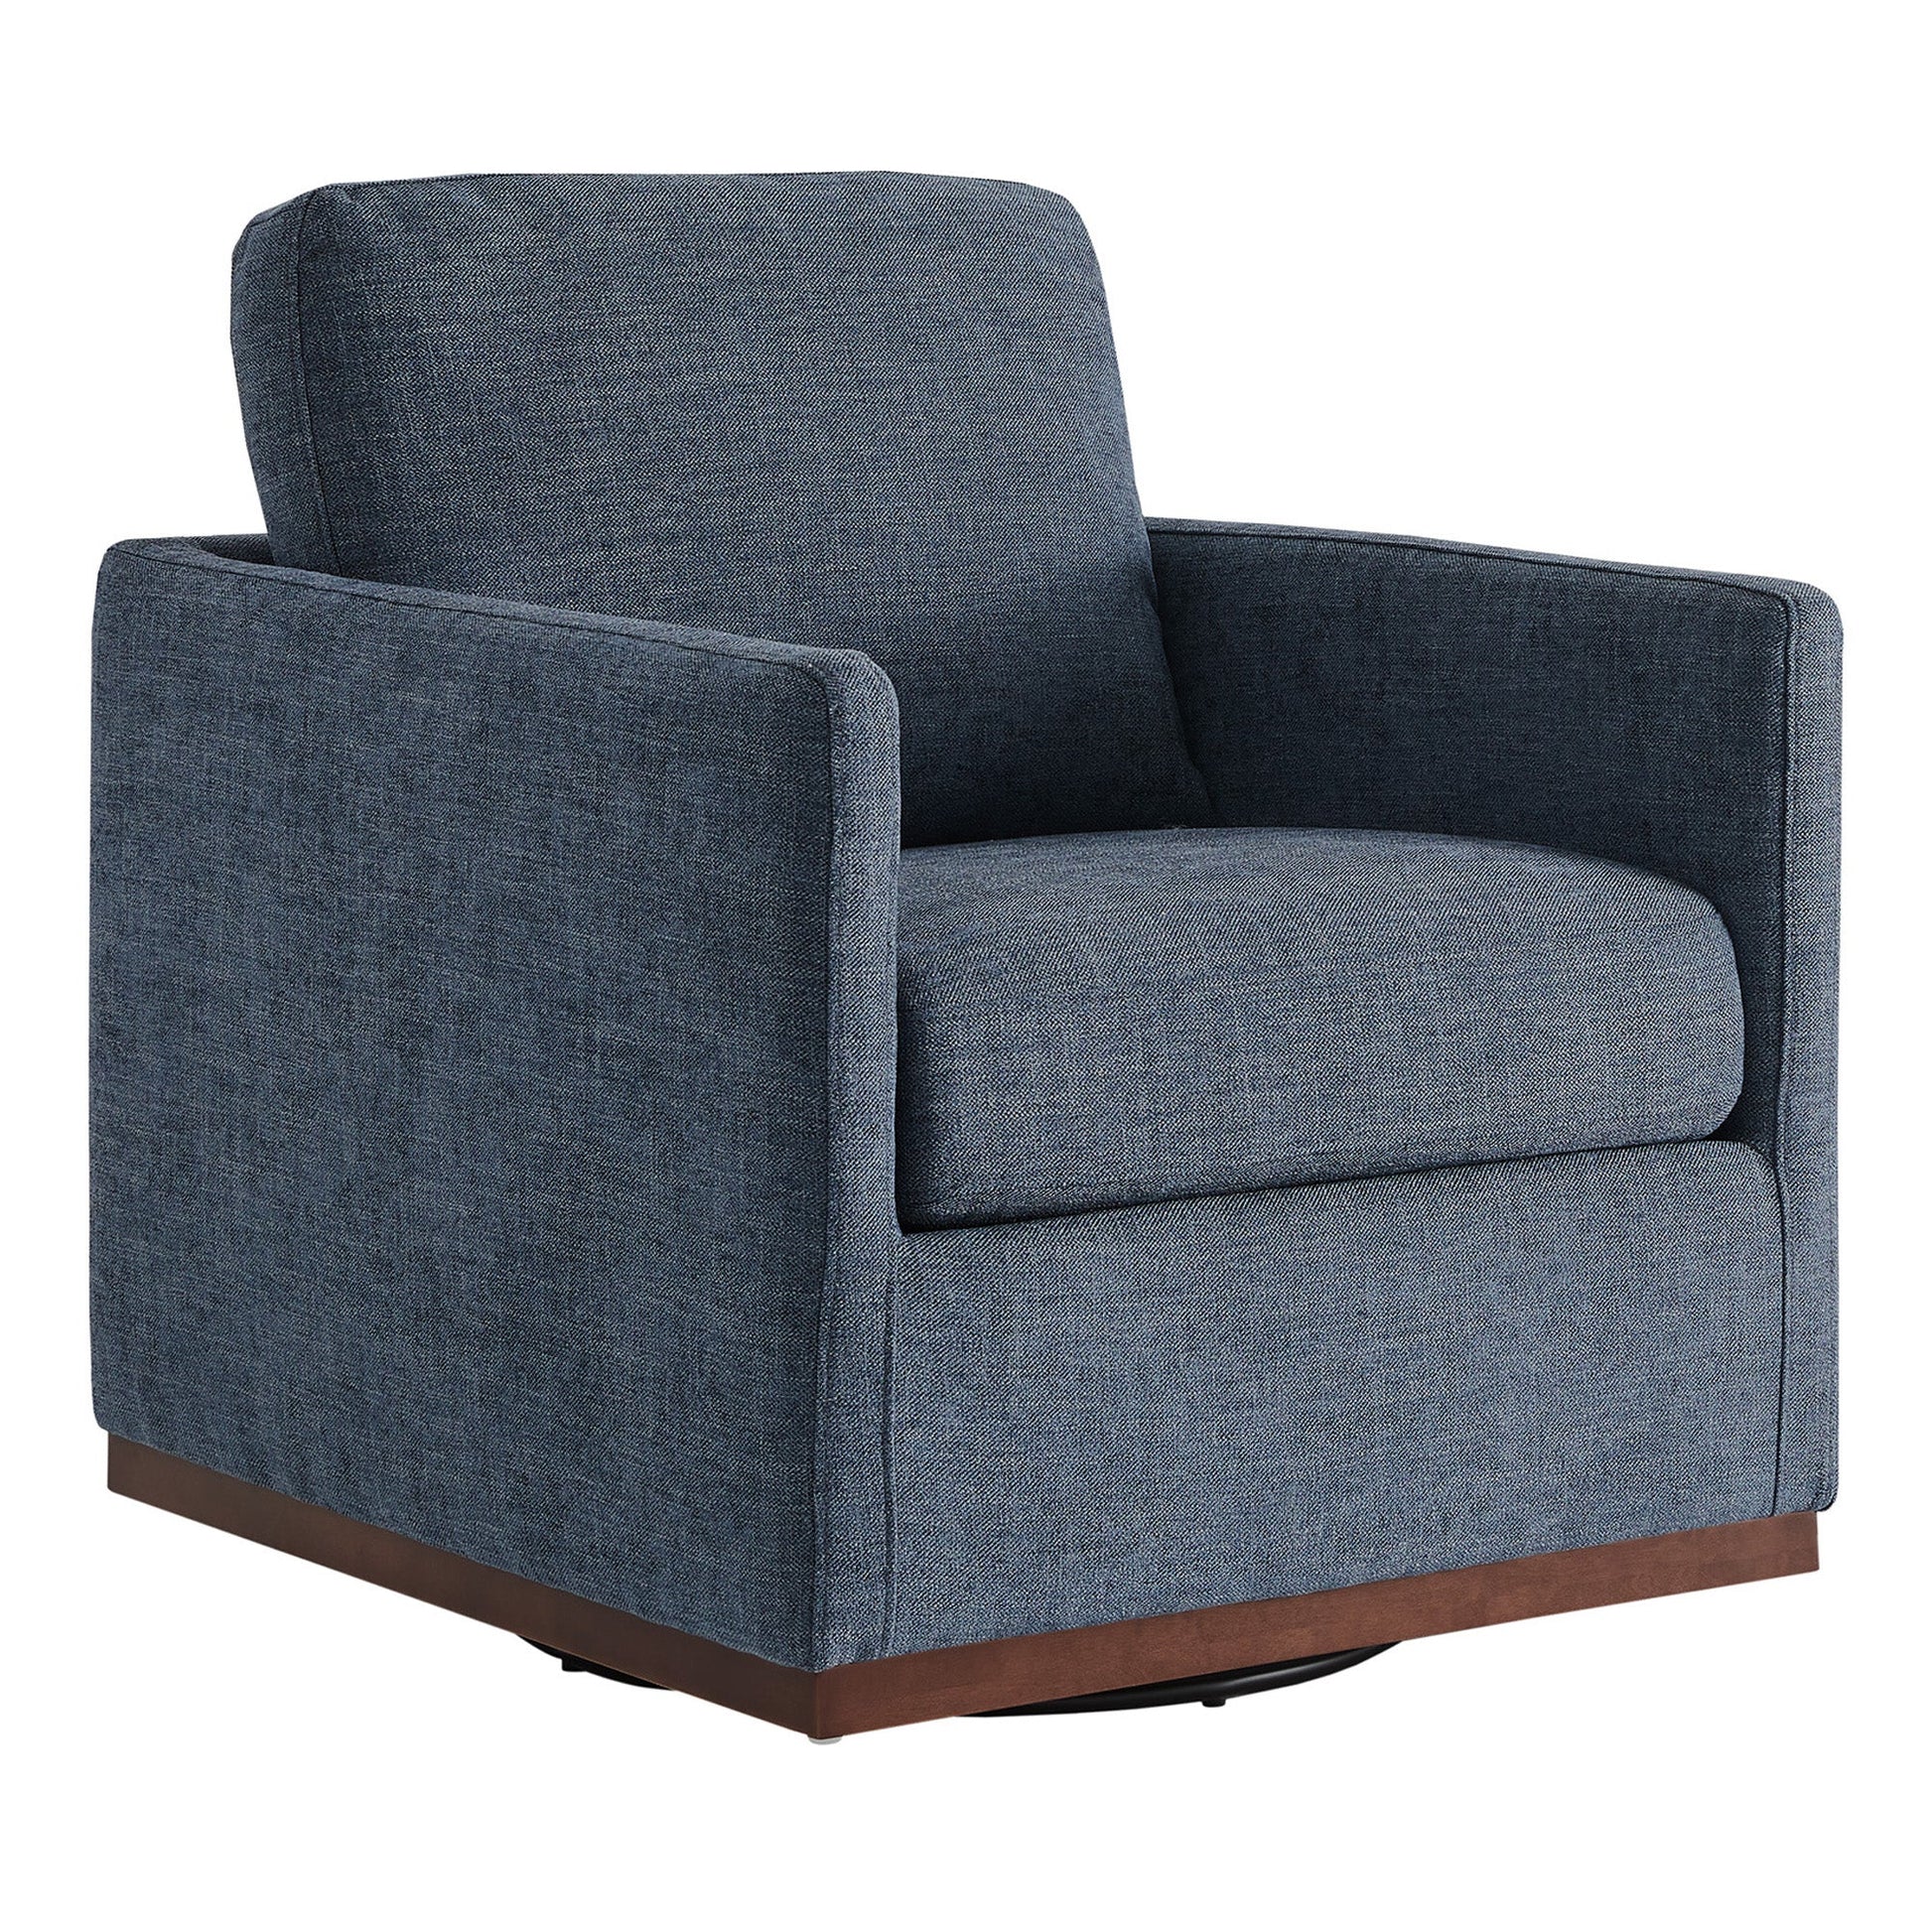 CHITA LIVING-Henry Swivel Accent Chair-Accent Chair-Fabric-Blue-